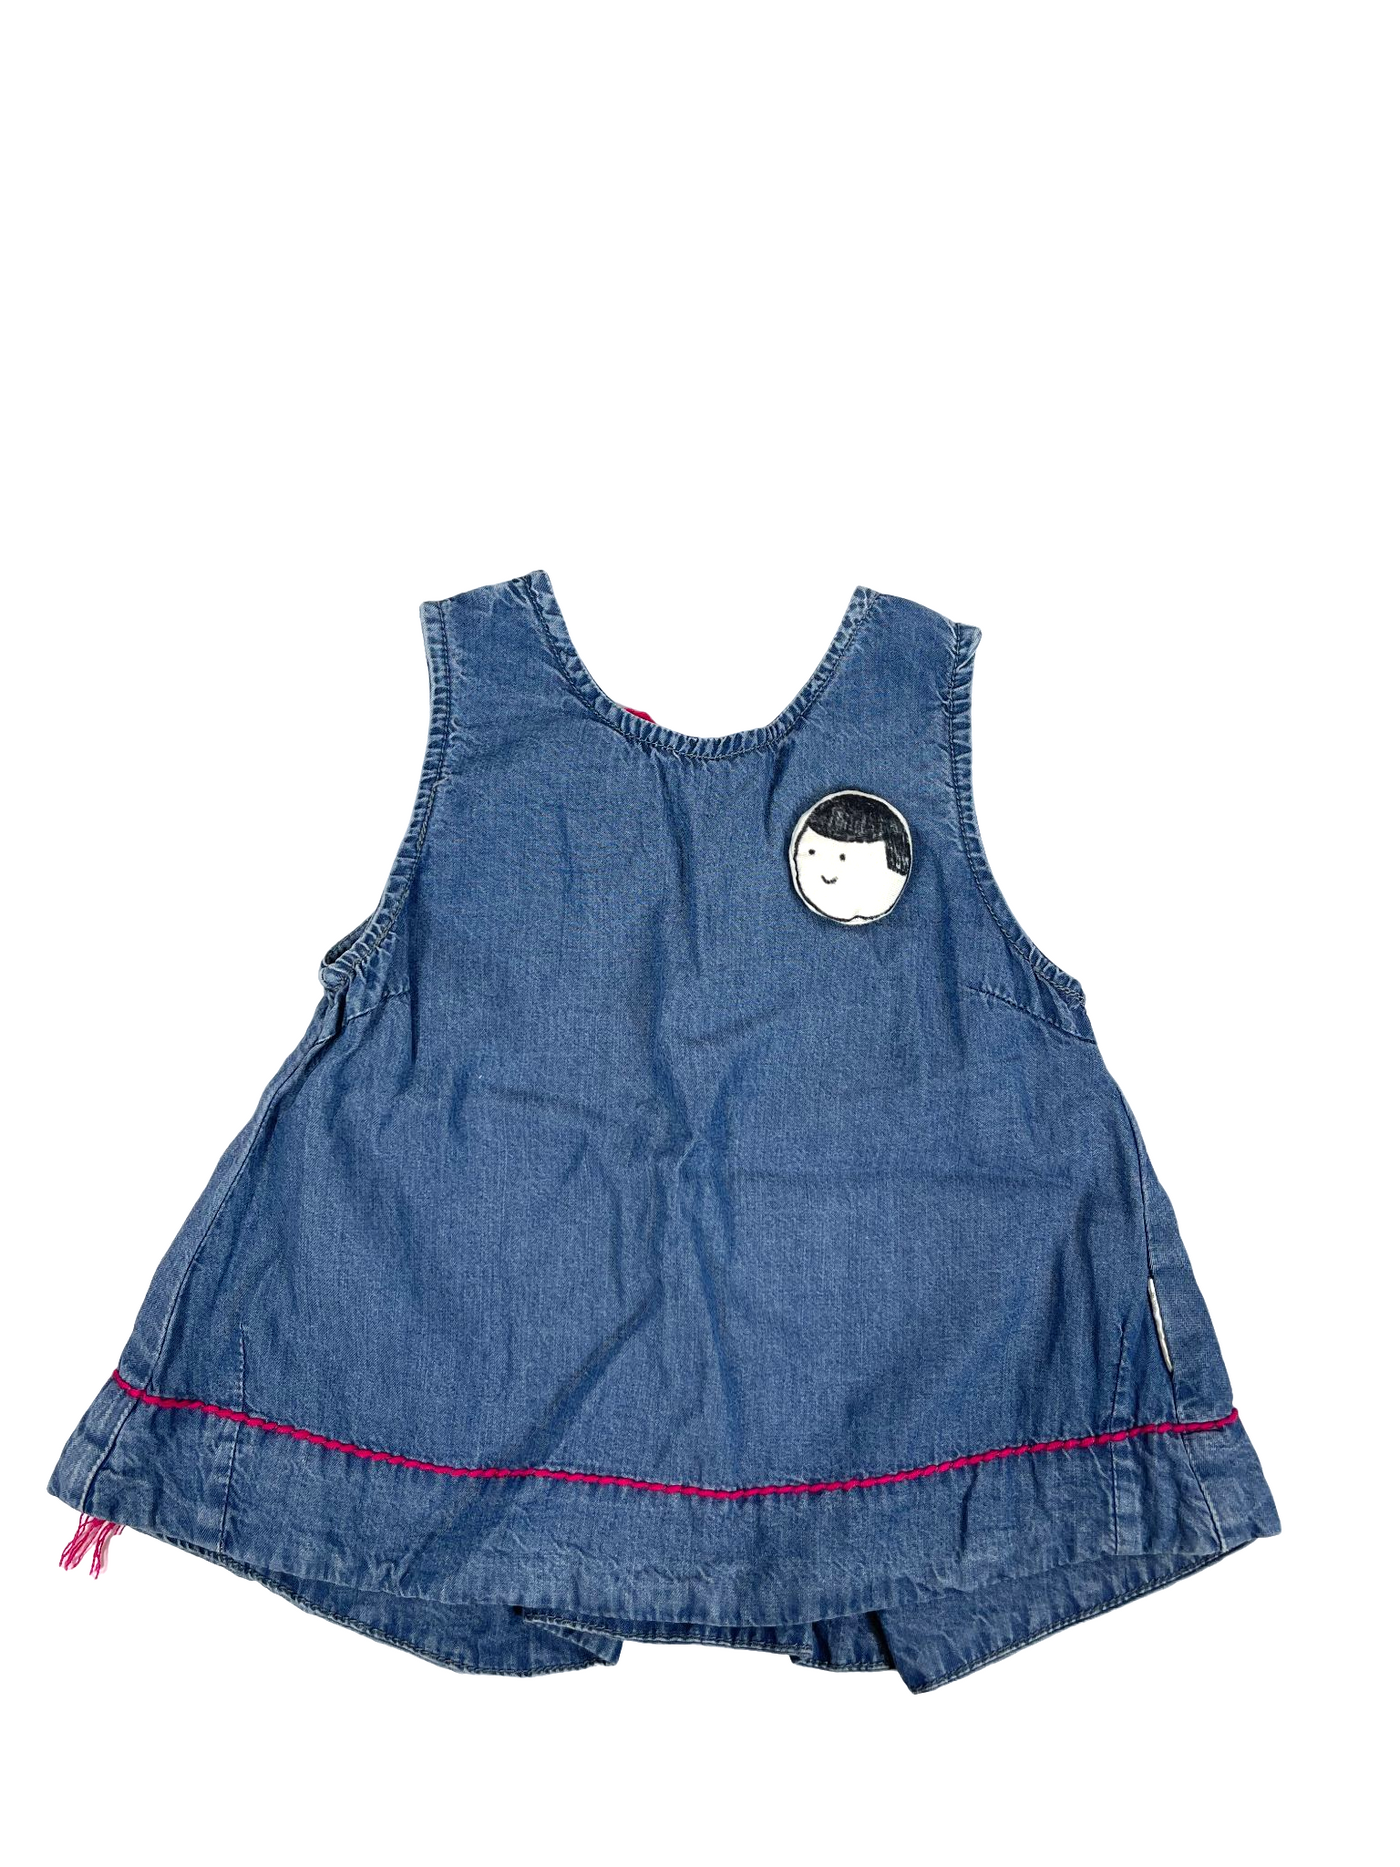 Unknown baby SLeeveless Top(6M)